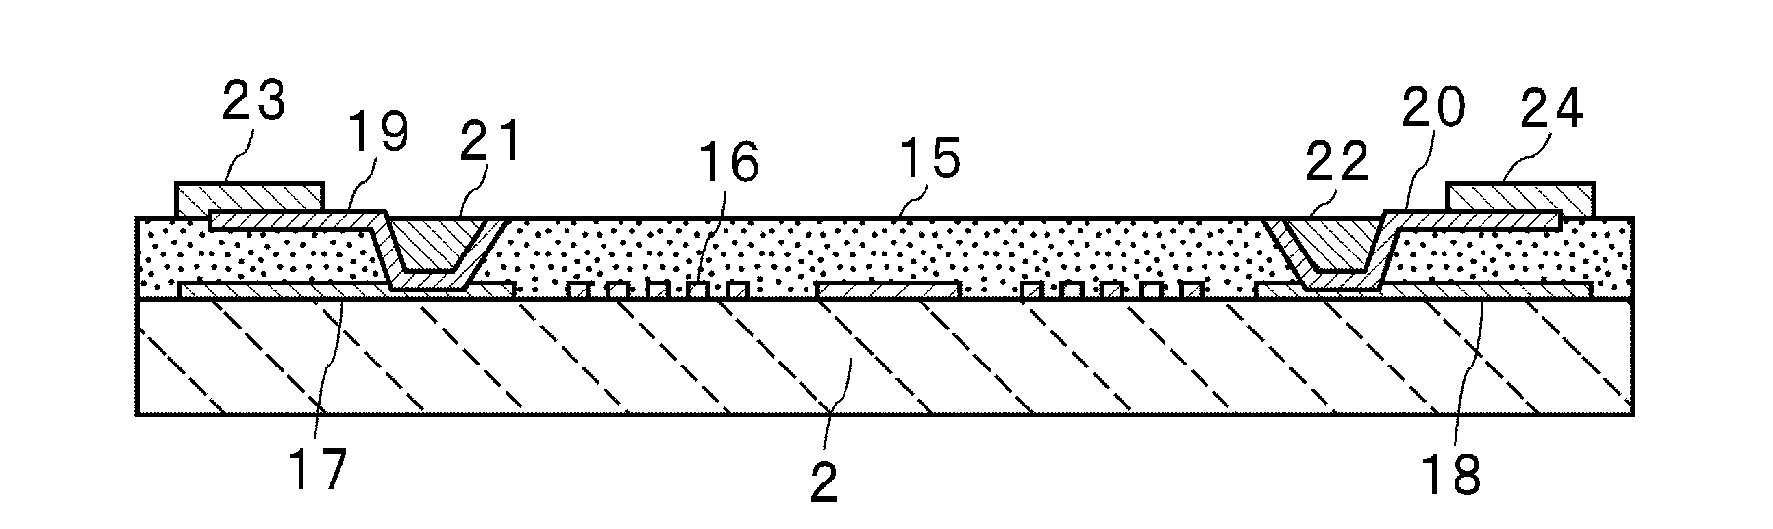 Acoustic wave filter device